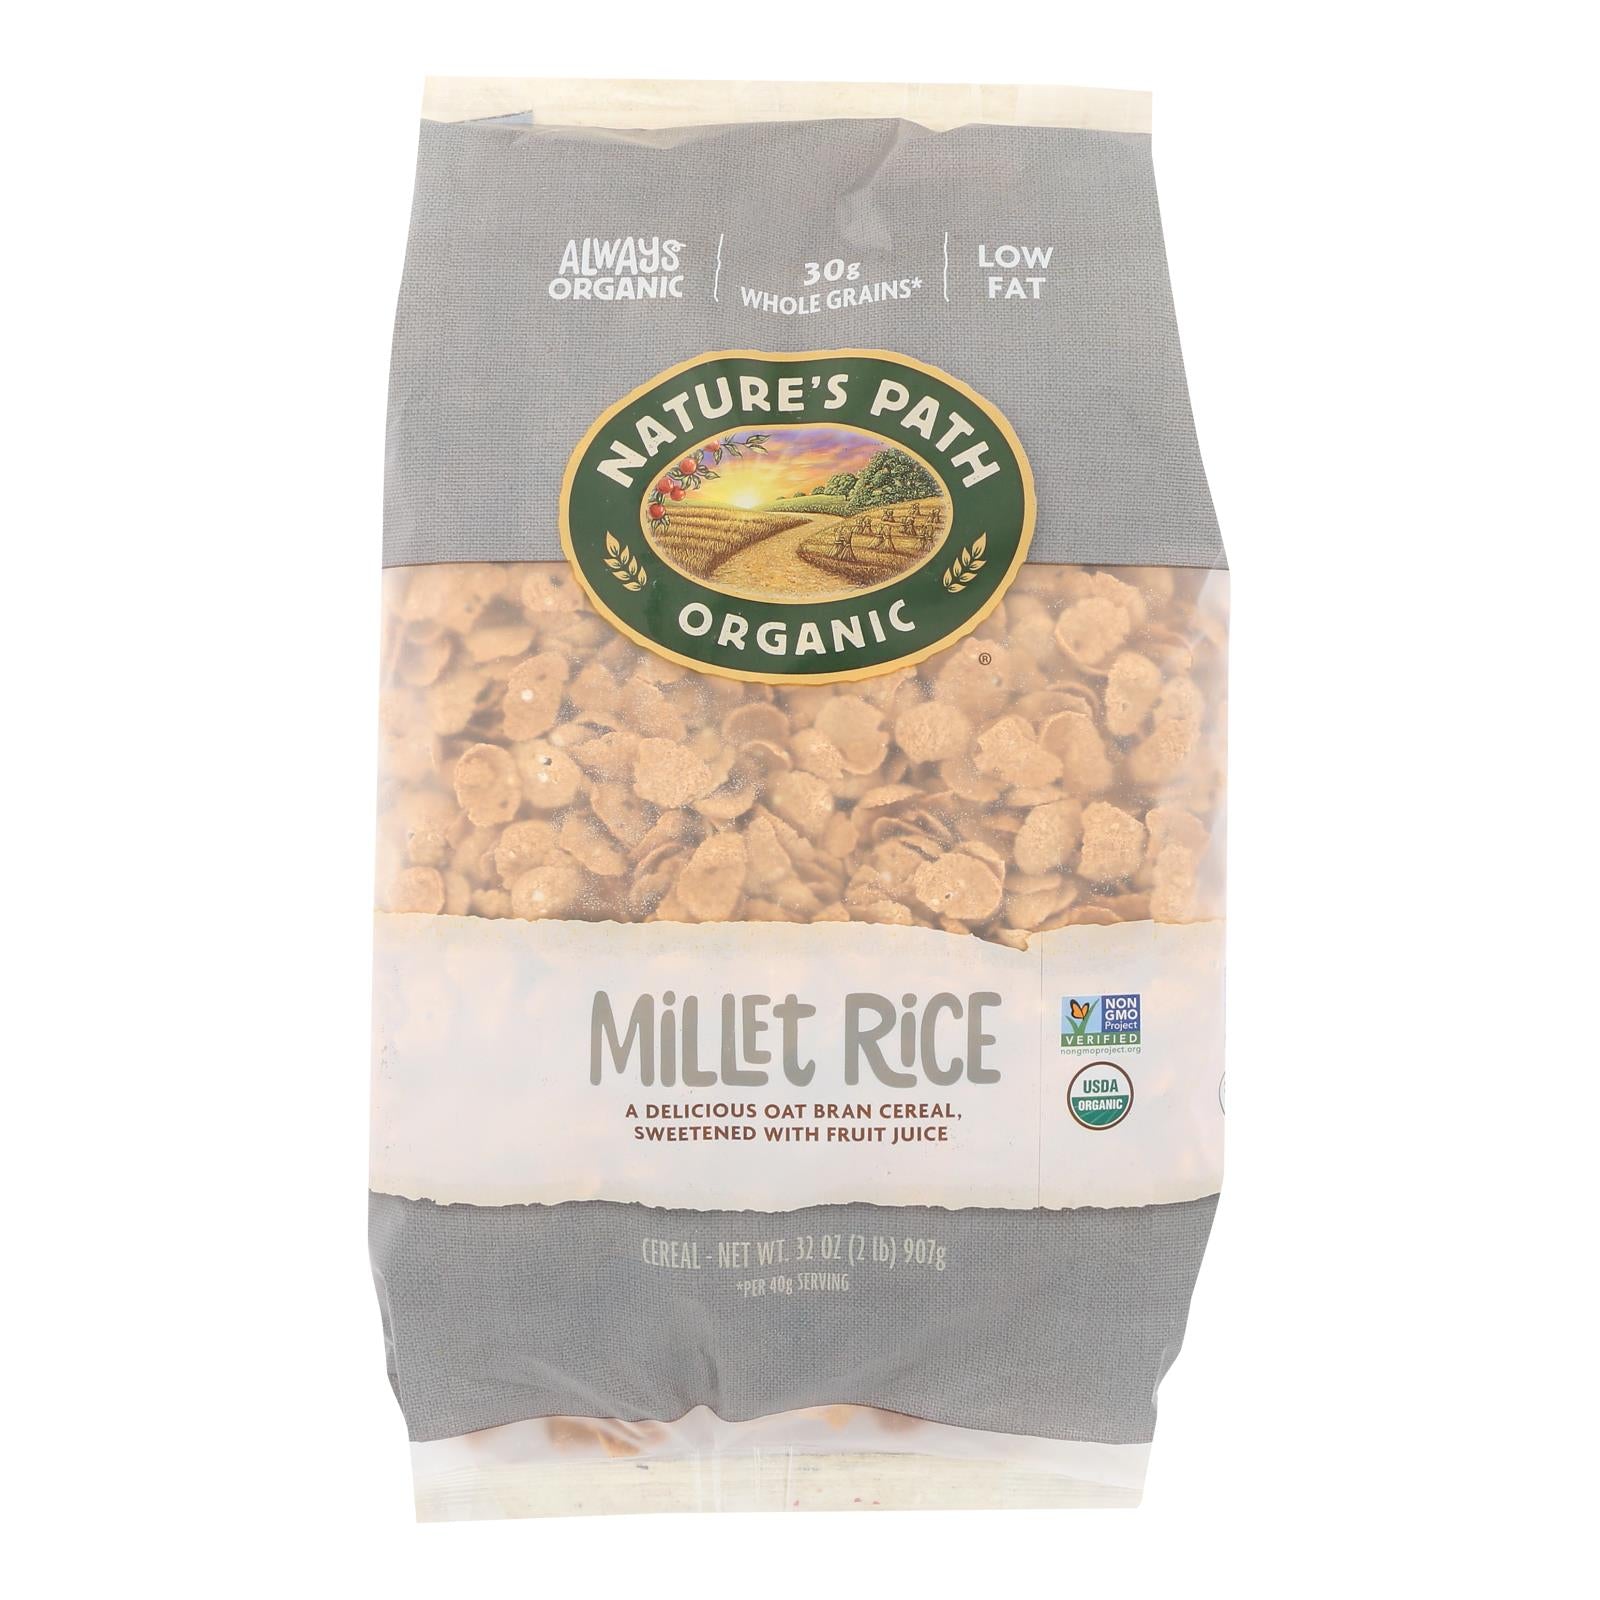 Nature's Path Organic Millet Rice Oat-bran Flakes Cereal - Case Of 6 - 32 Oz.